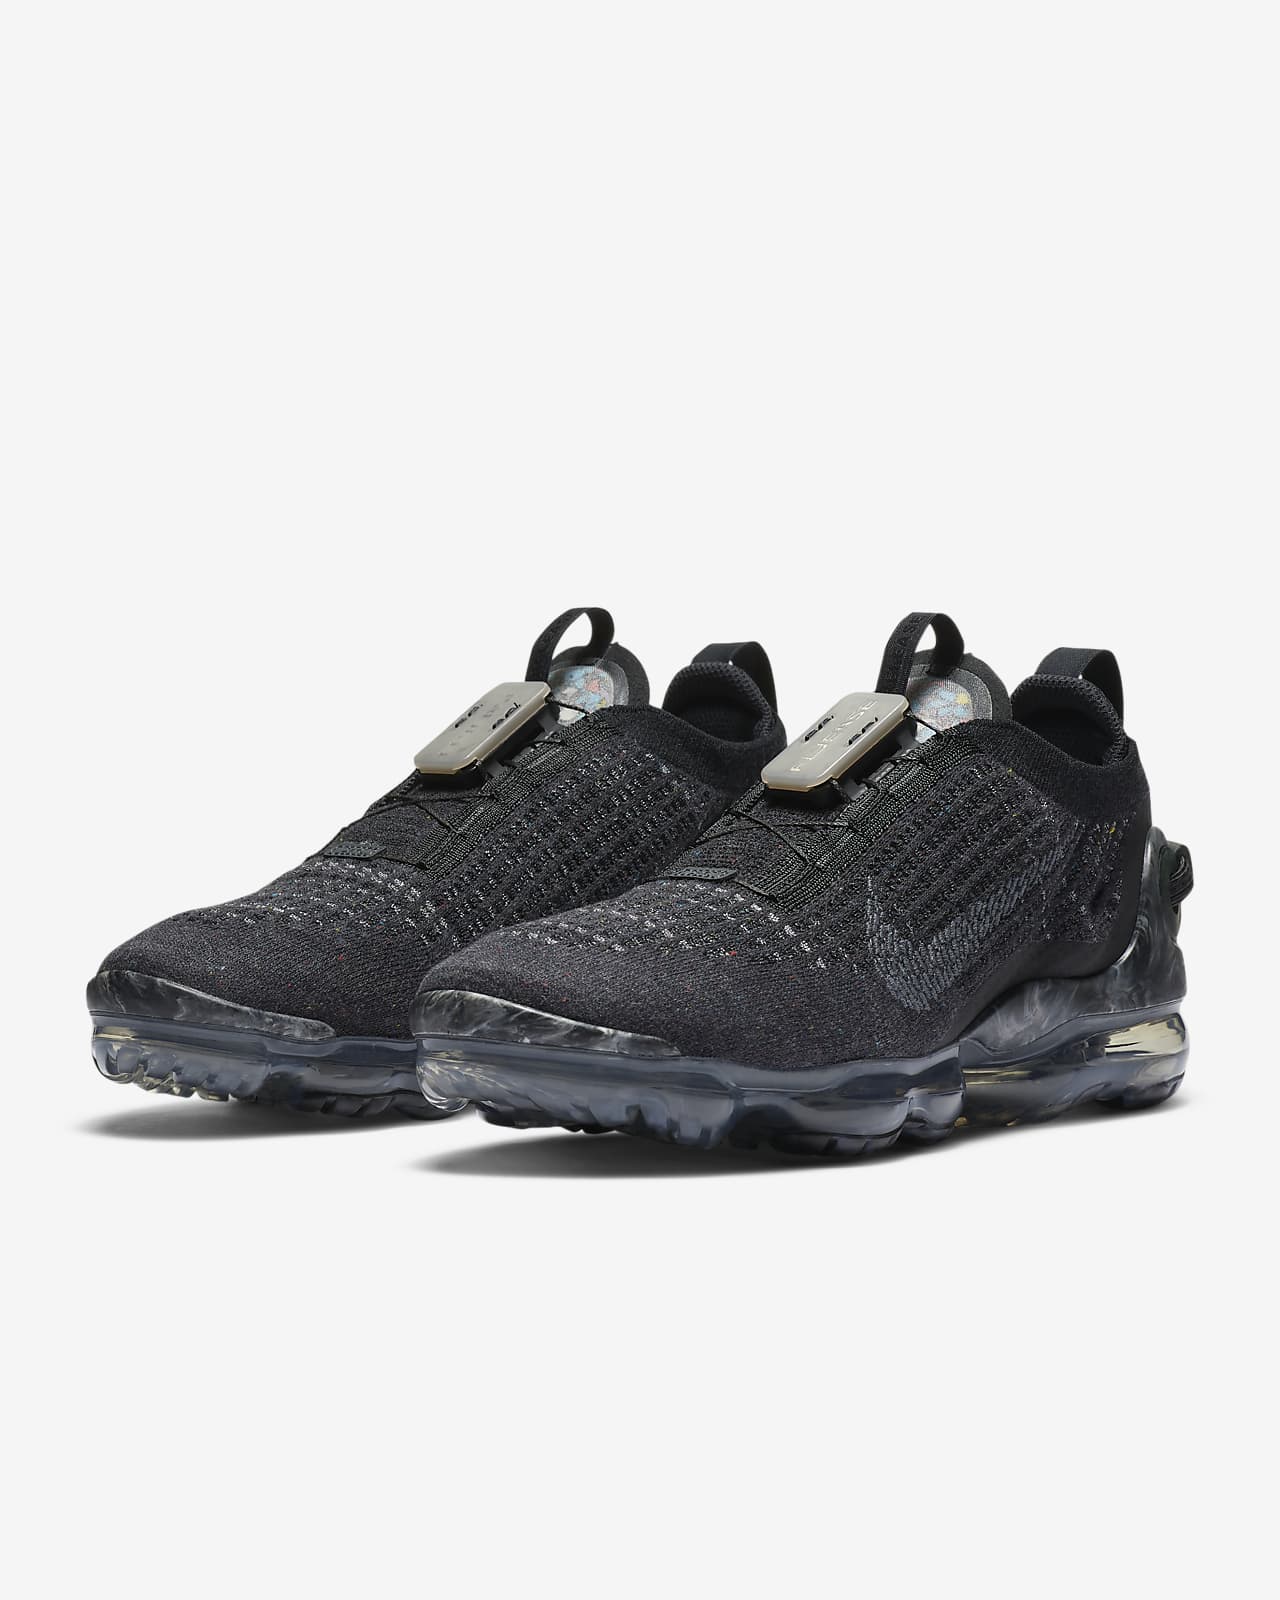 Air vapormax flyknit 2020 - Black TRAINERS NIKE   